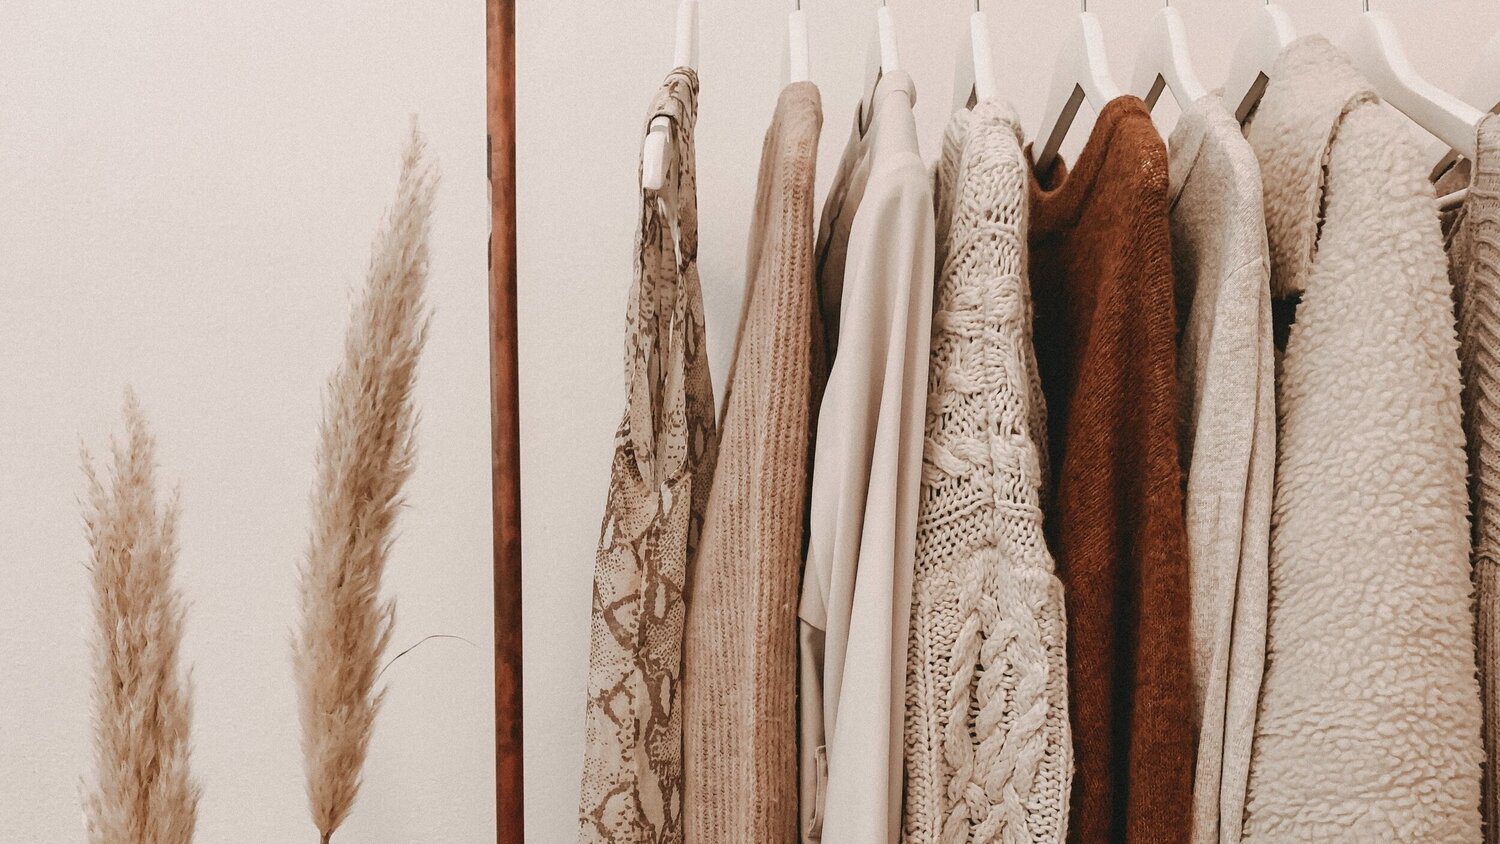 5 STEPS TO ORGANISE YOUR WARDROBE